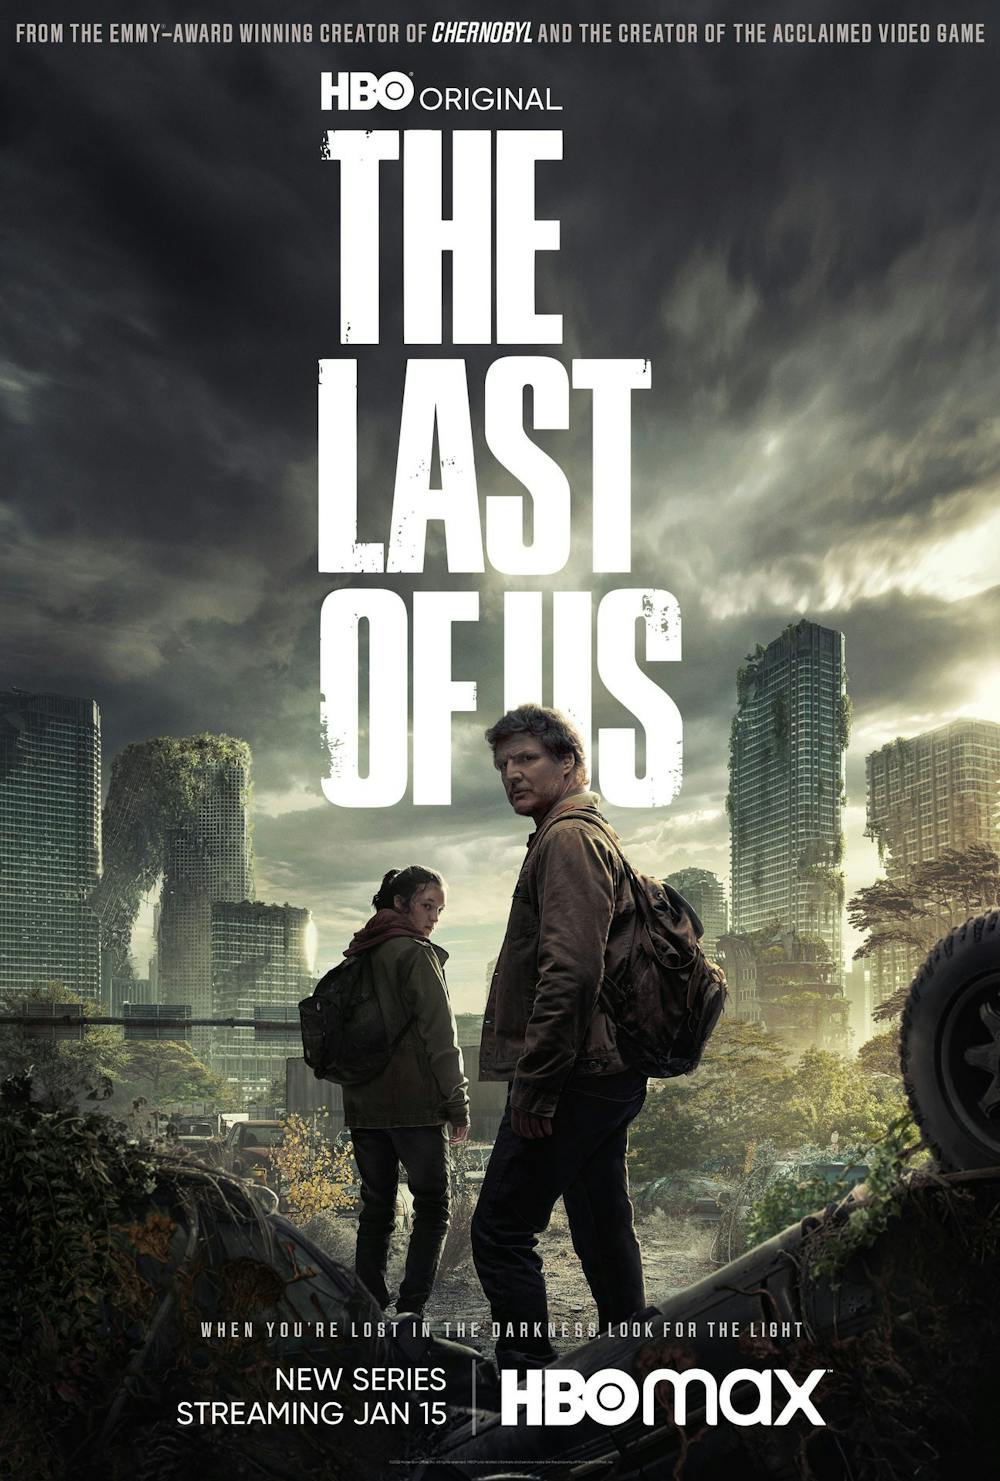 Review: The last of 'The Last of Us' season one is gripping